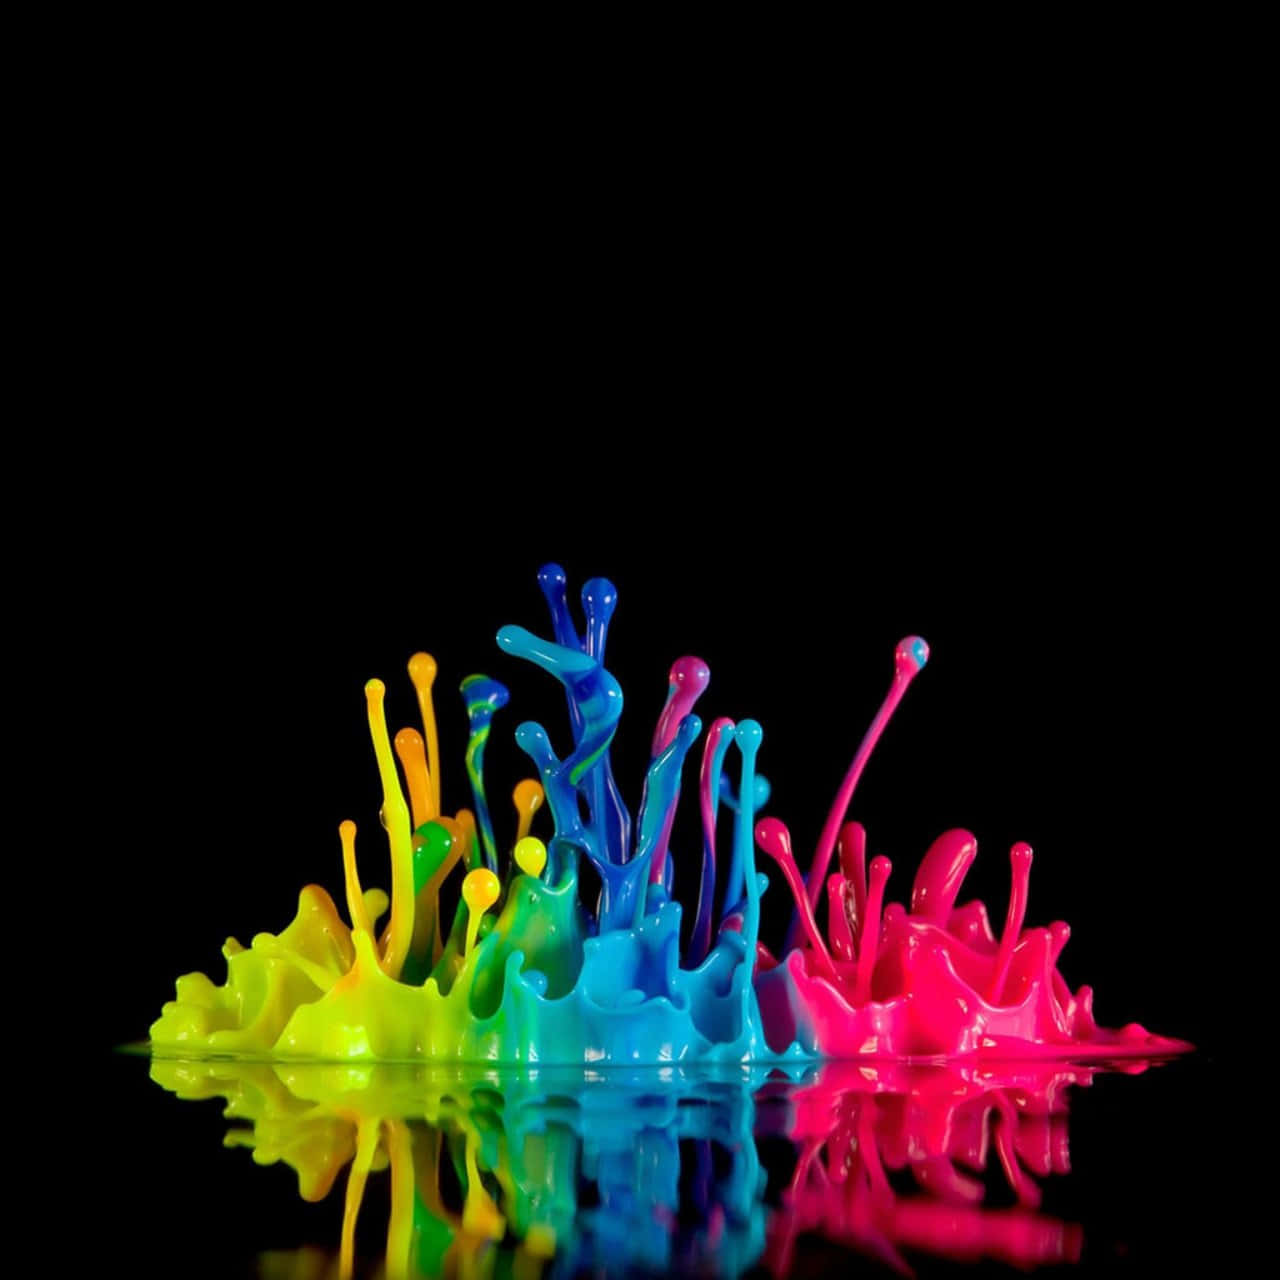 Colorful Wax Paint Splatter Background